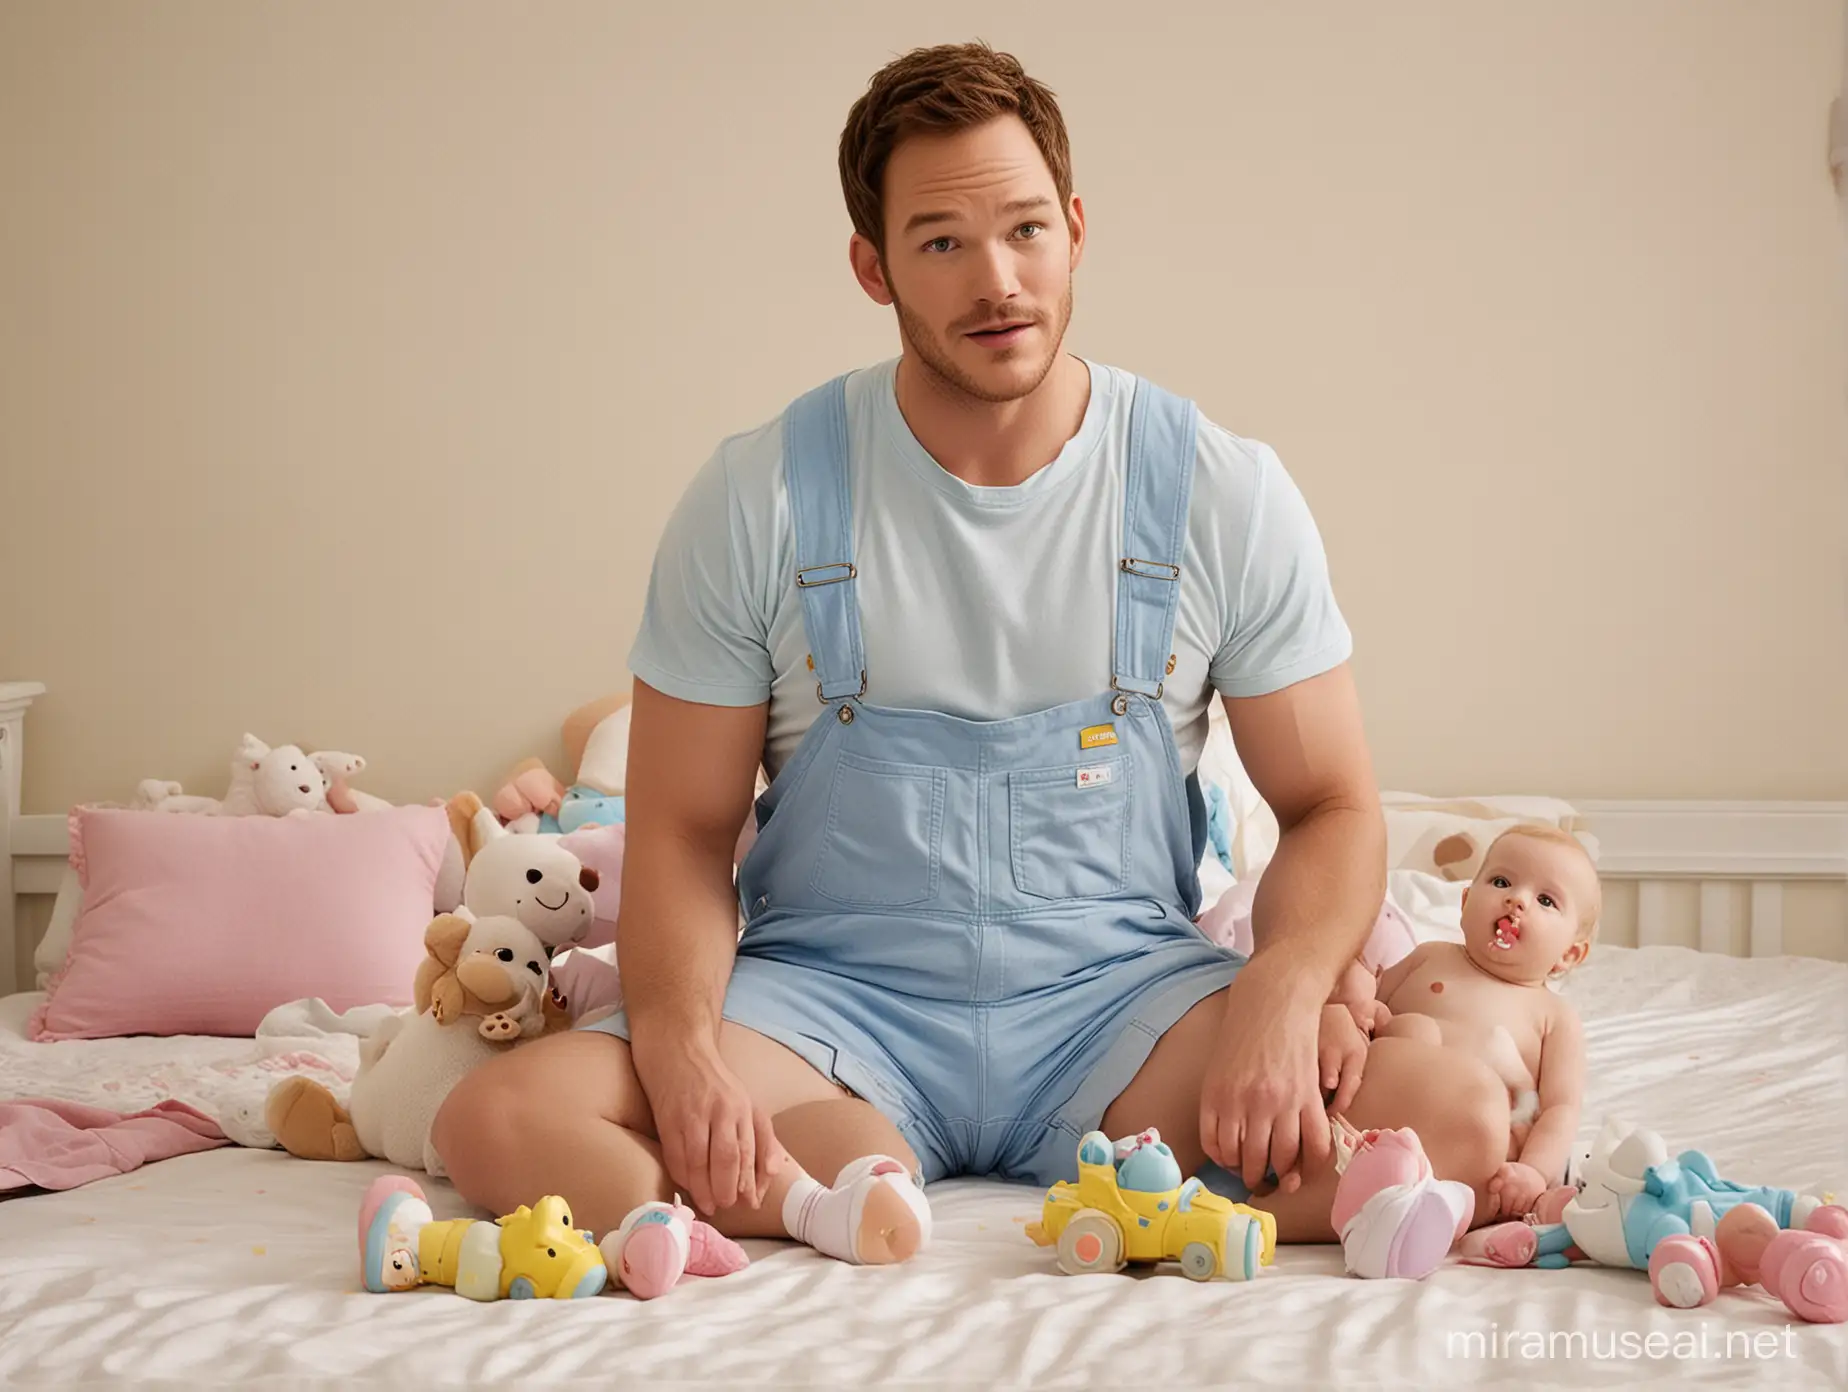 Chris Pratt as an adult baby. He's wearing diapers. He's wearing shortalls. He's sucking on a pacifier. He's playing with his toys in a giant nursery.